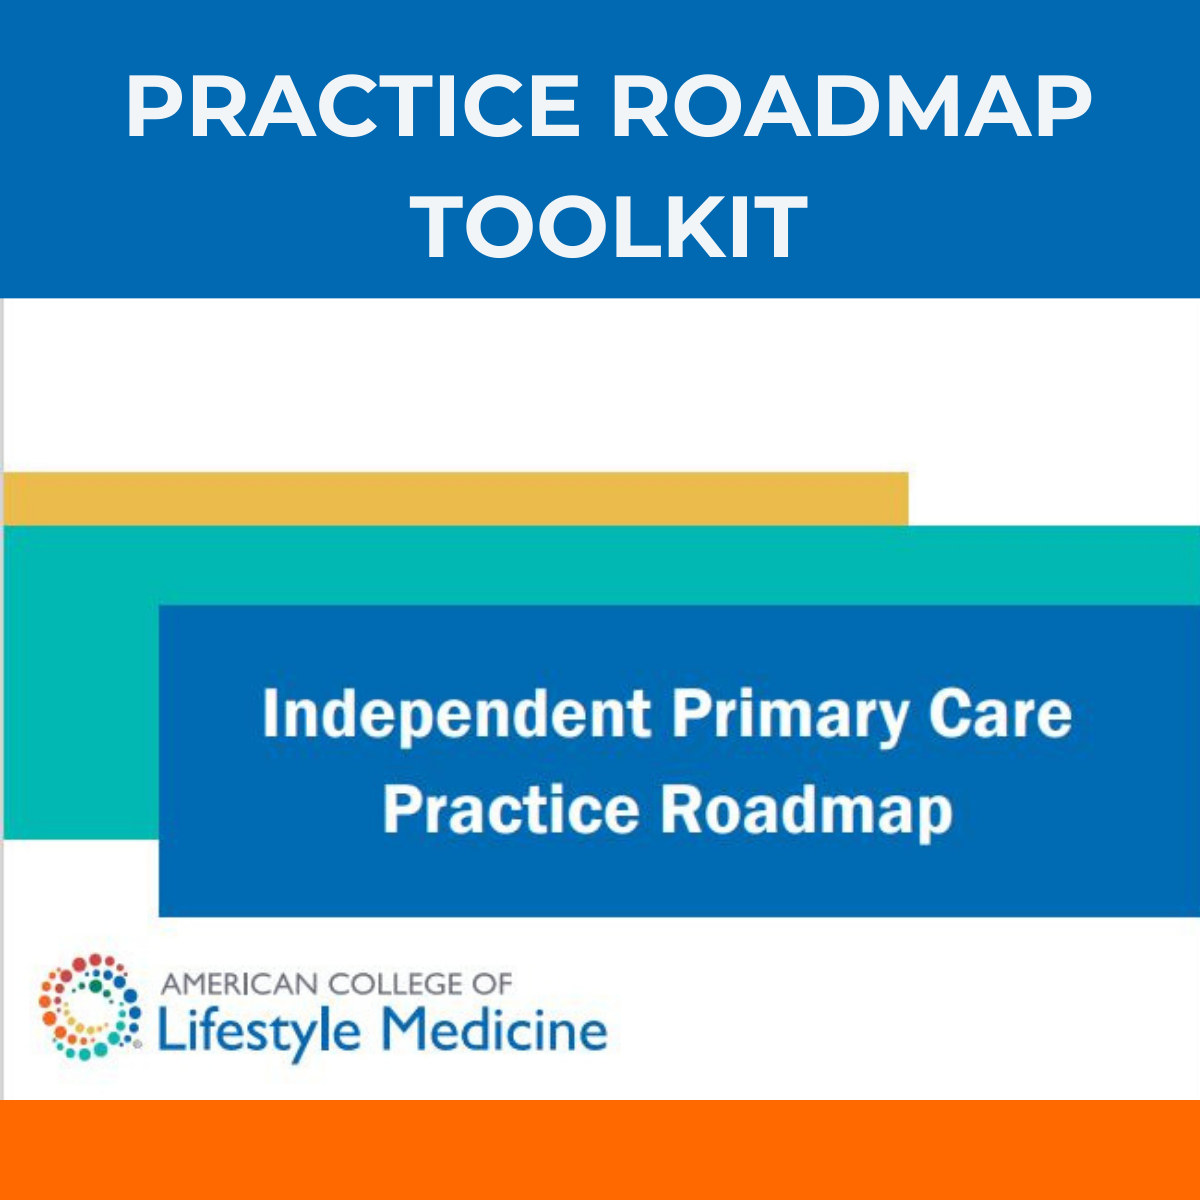 Independent Primary Care Practice Roadmap Toolkit